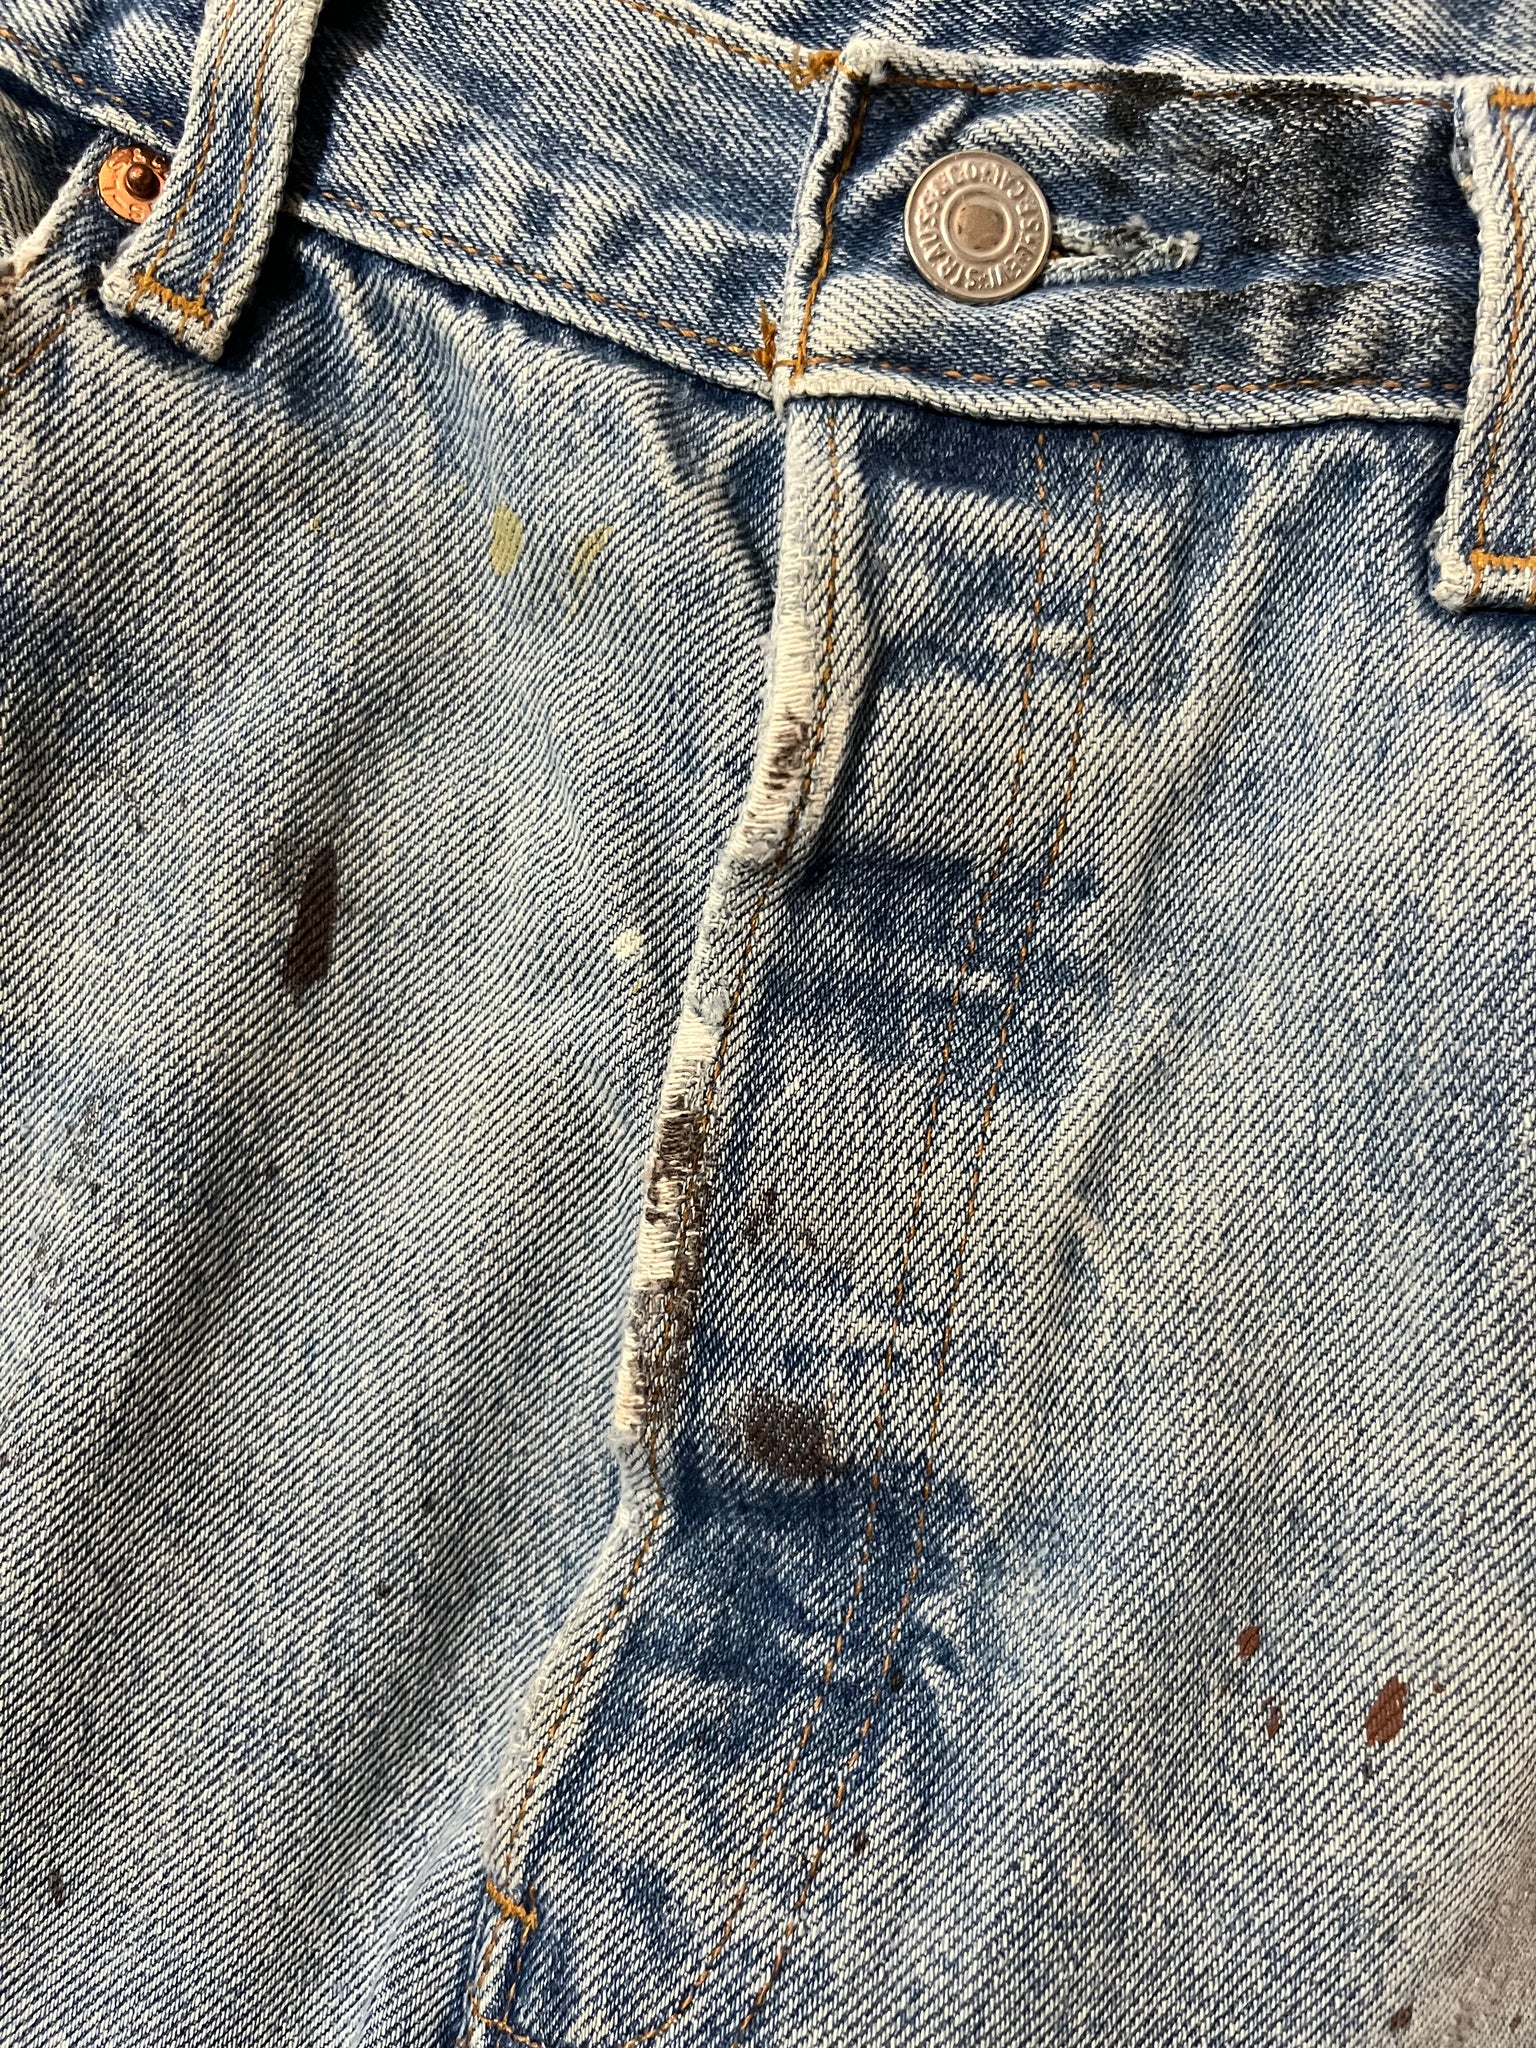 VINTAGE PAINT SPLATTERED LEVIS JEANS – Discount Beepers